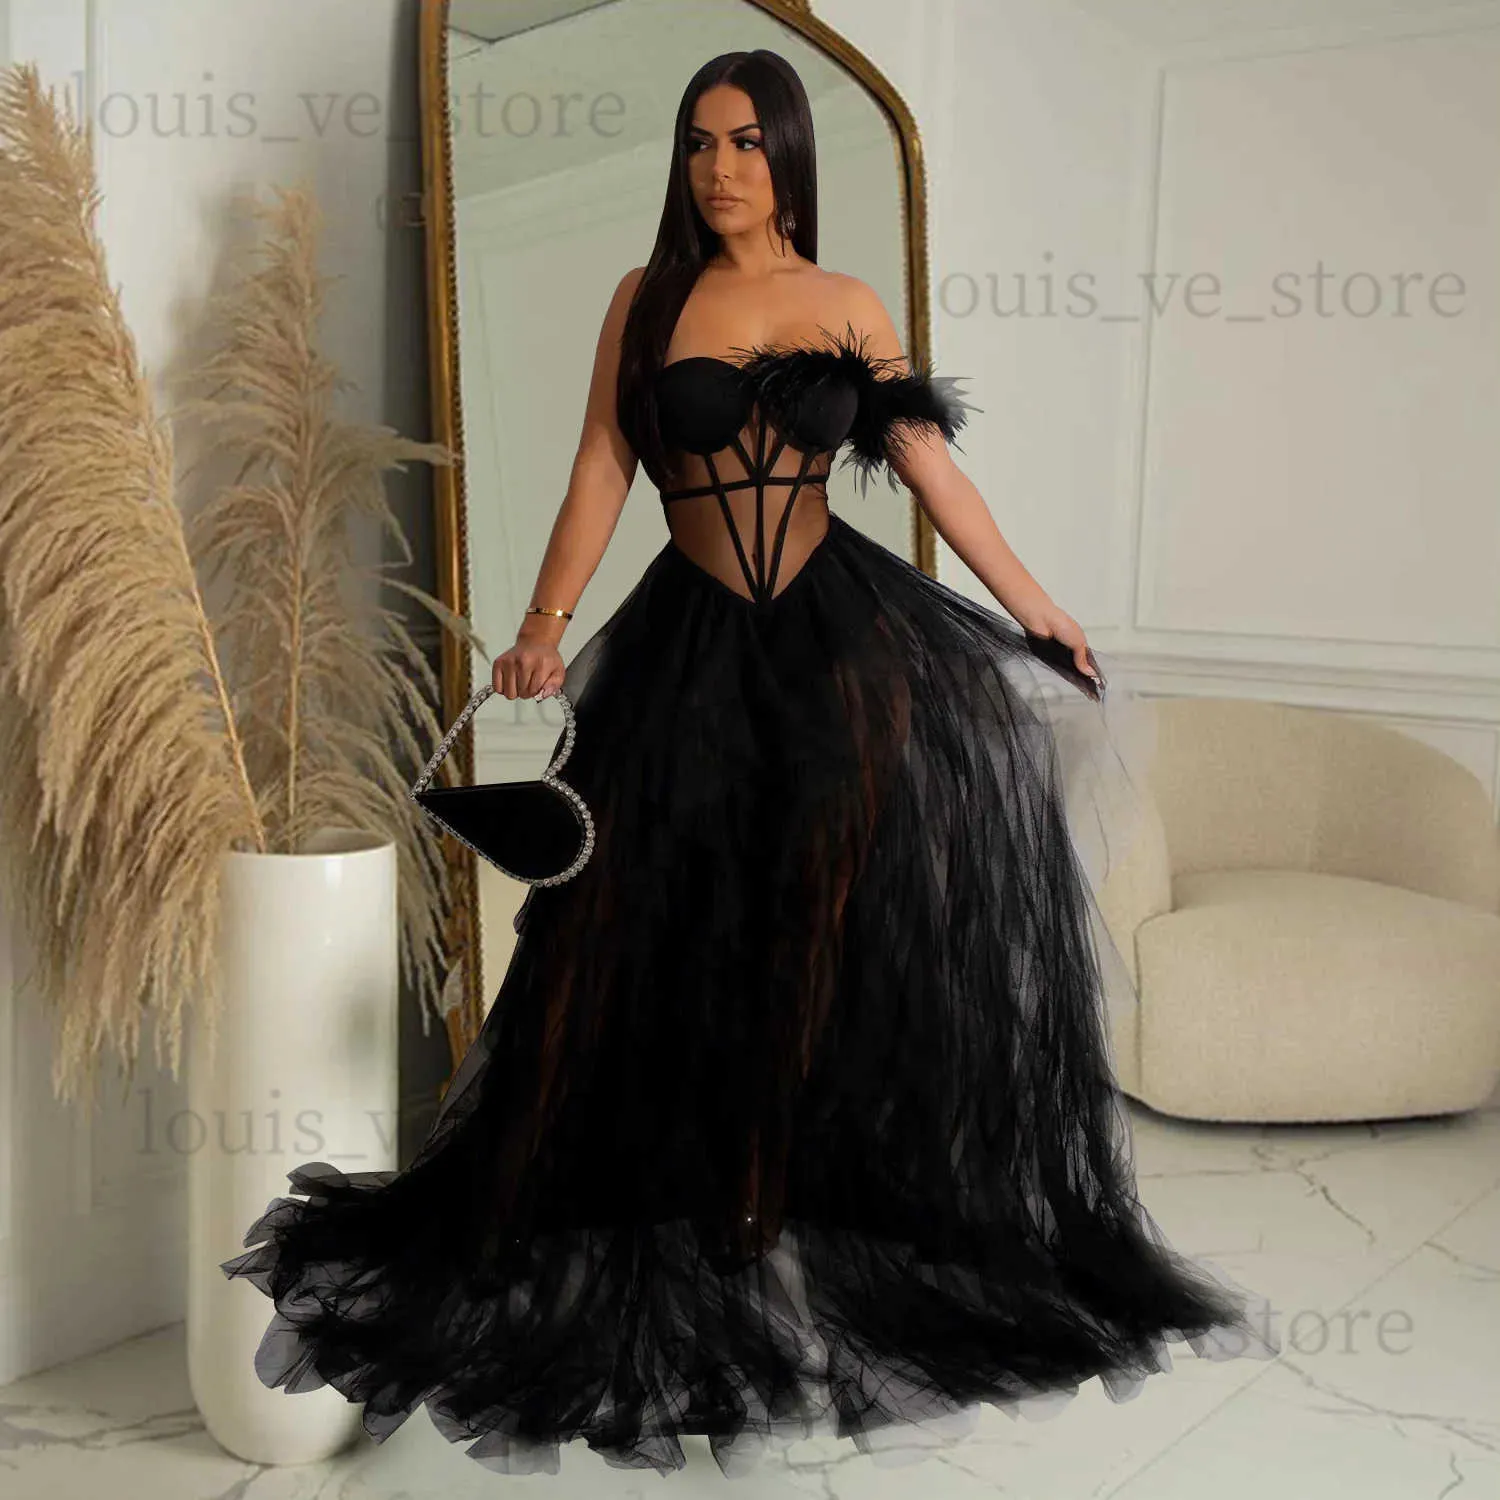 Urban Sexy Dresses Beautiful Ruffles Chffion Party Feather Maxi Dress Elegant Sheer Mesh Corset Long Party Dress Gowns Birthday Outfits T231214